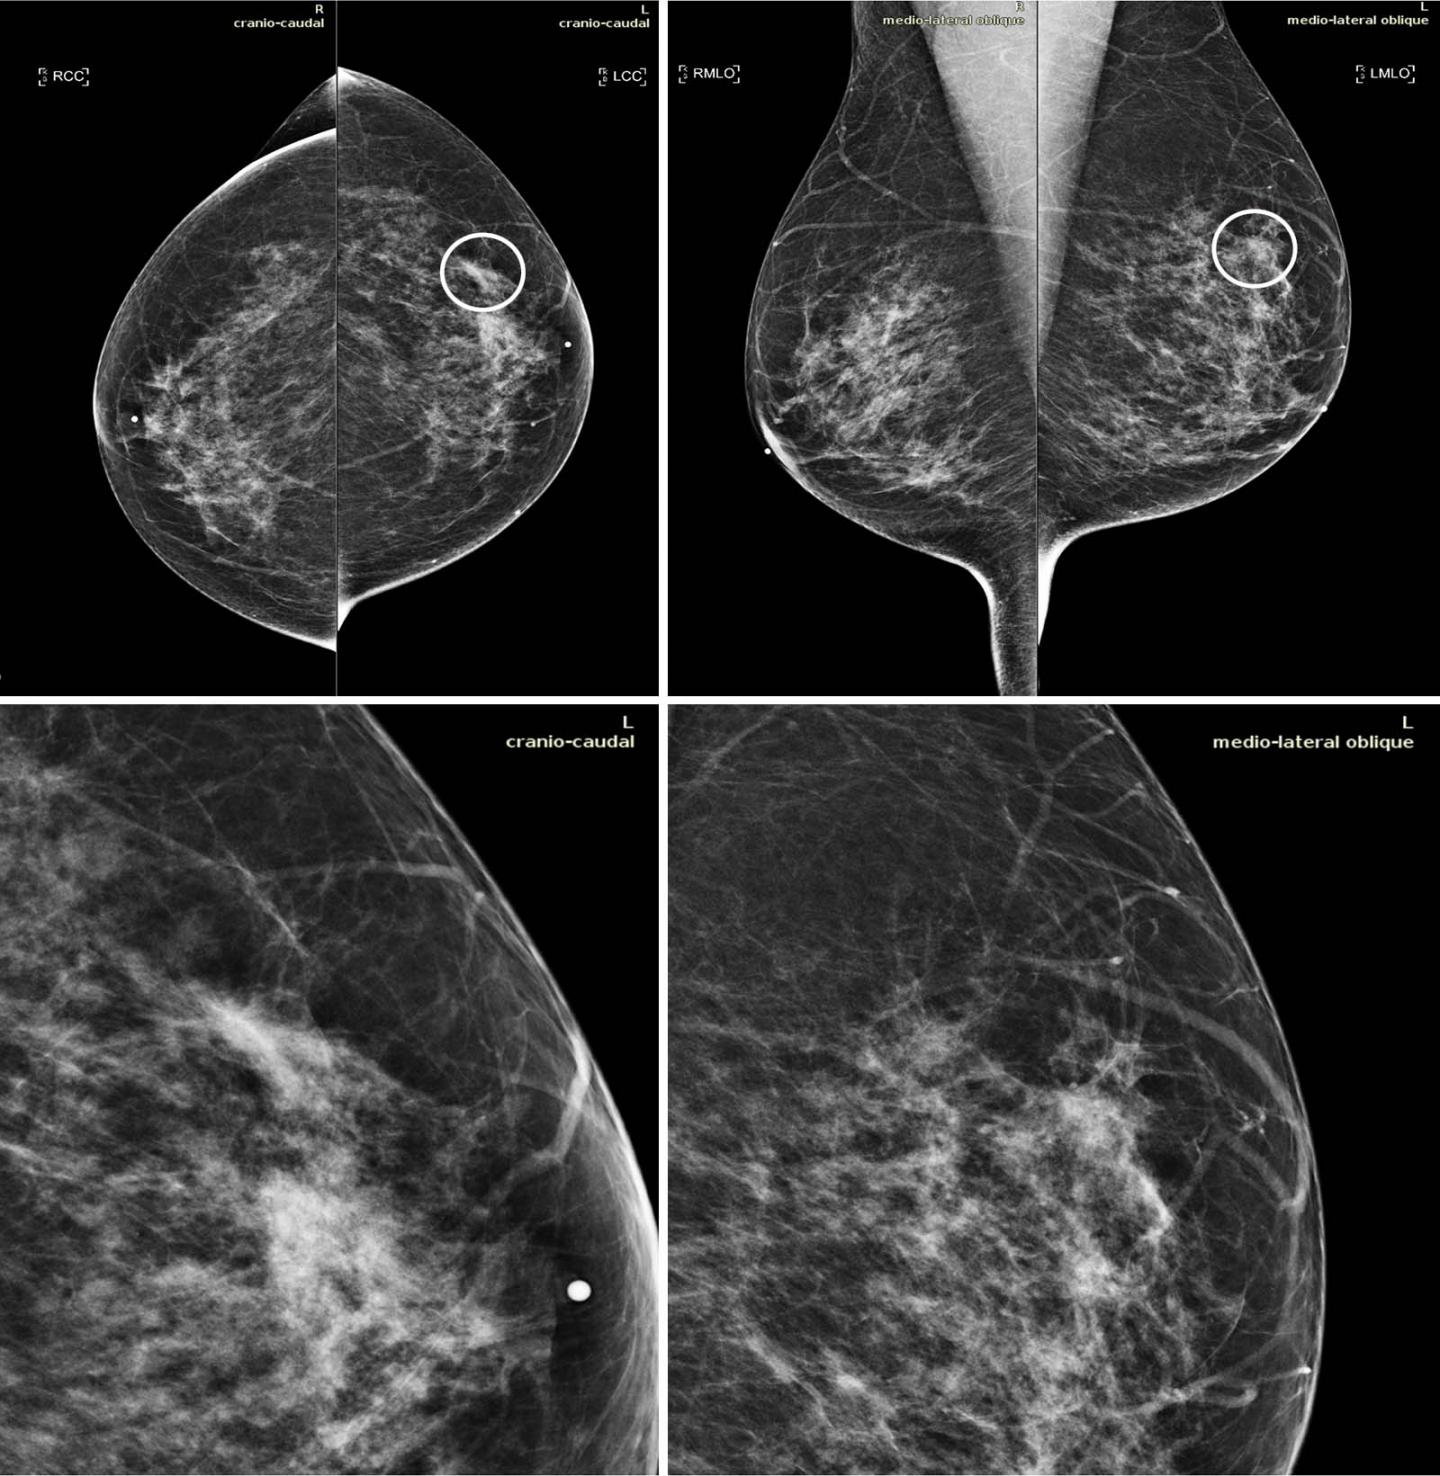 AI Tool Improves Breast Cancer Detection on Mammography